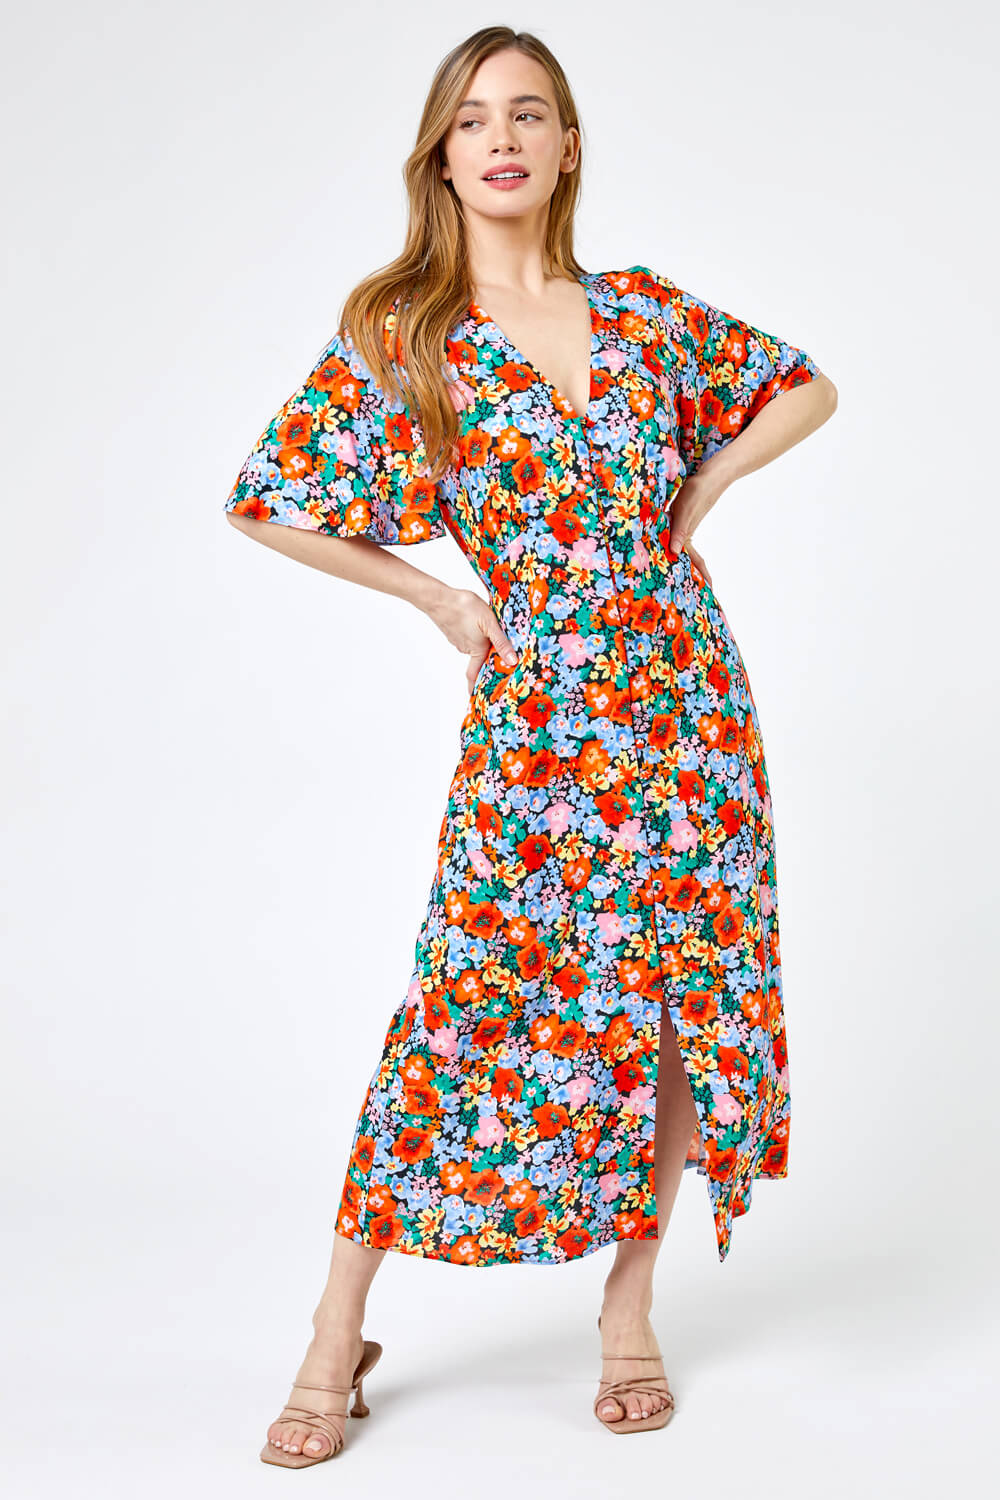 Topshop Petite Bold Floral High Neck Dipped Cowl Back Dress